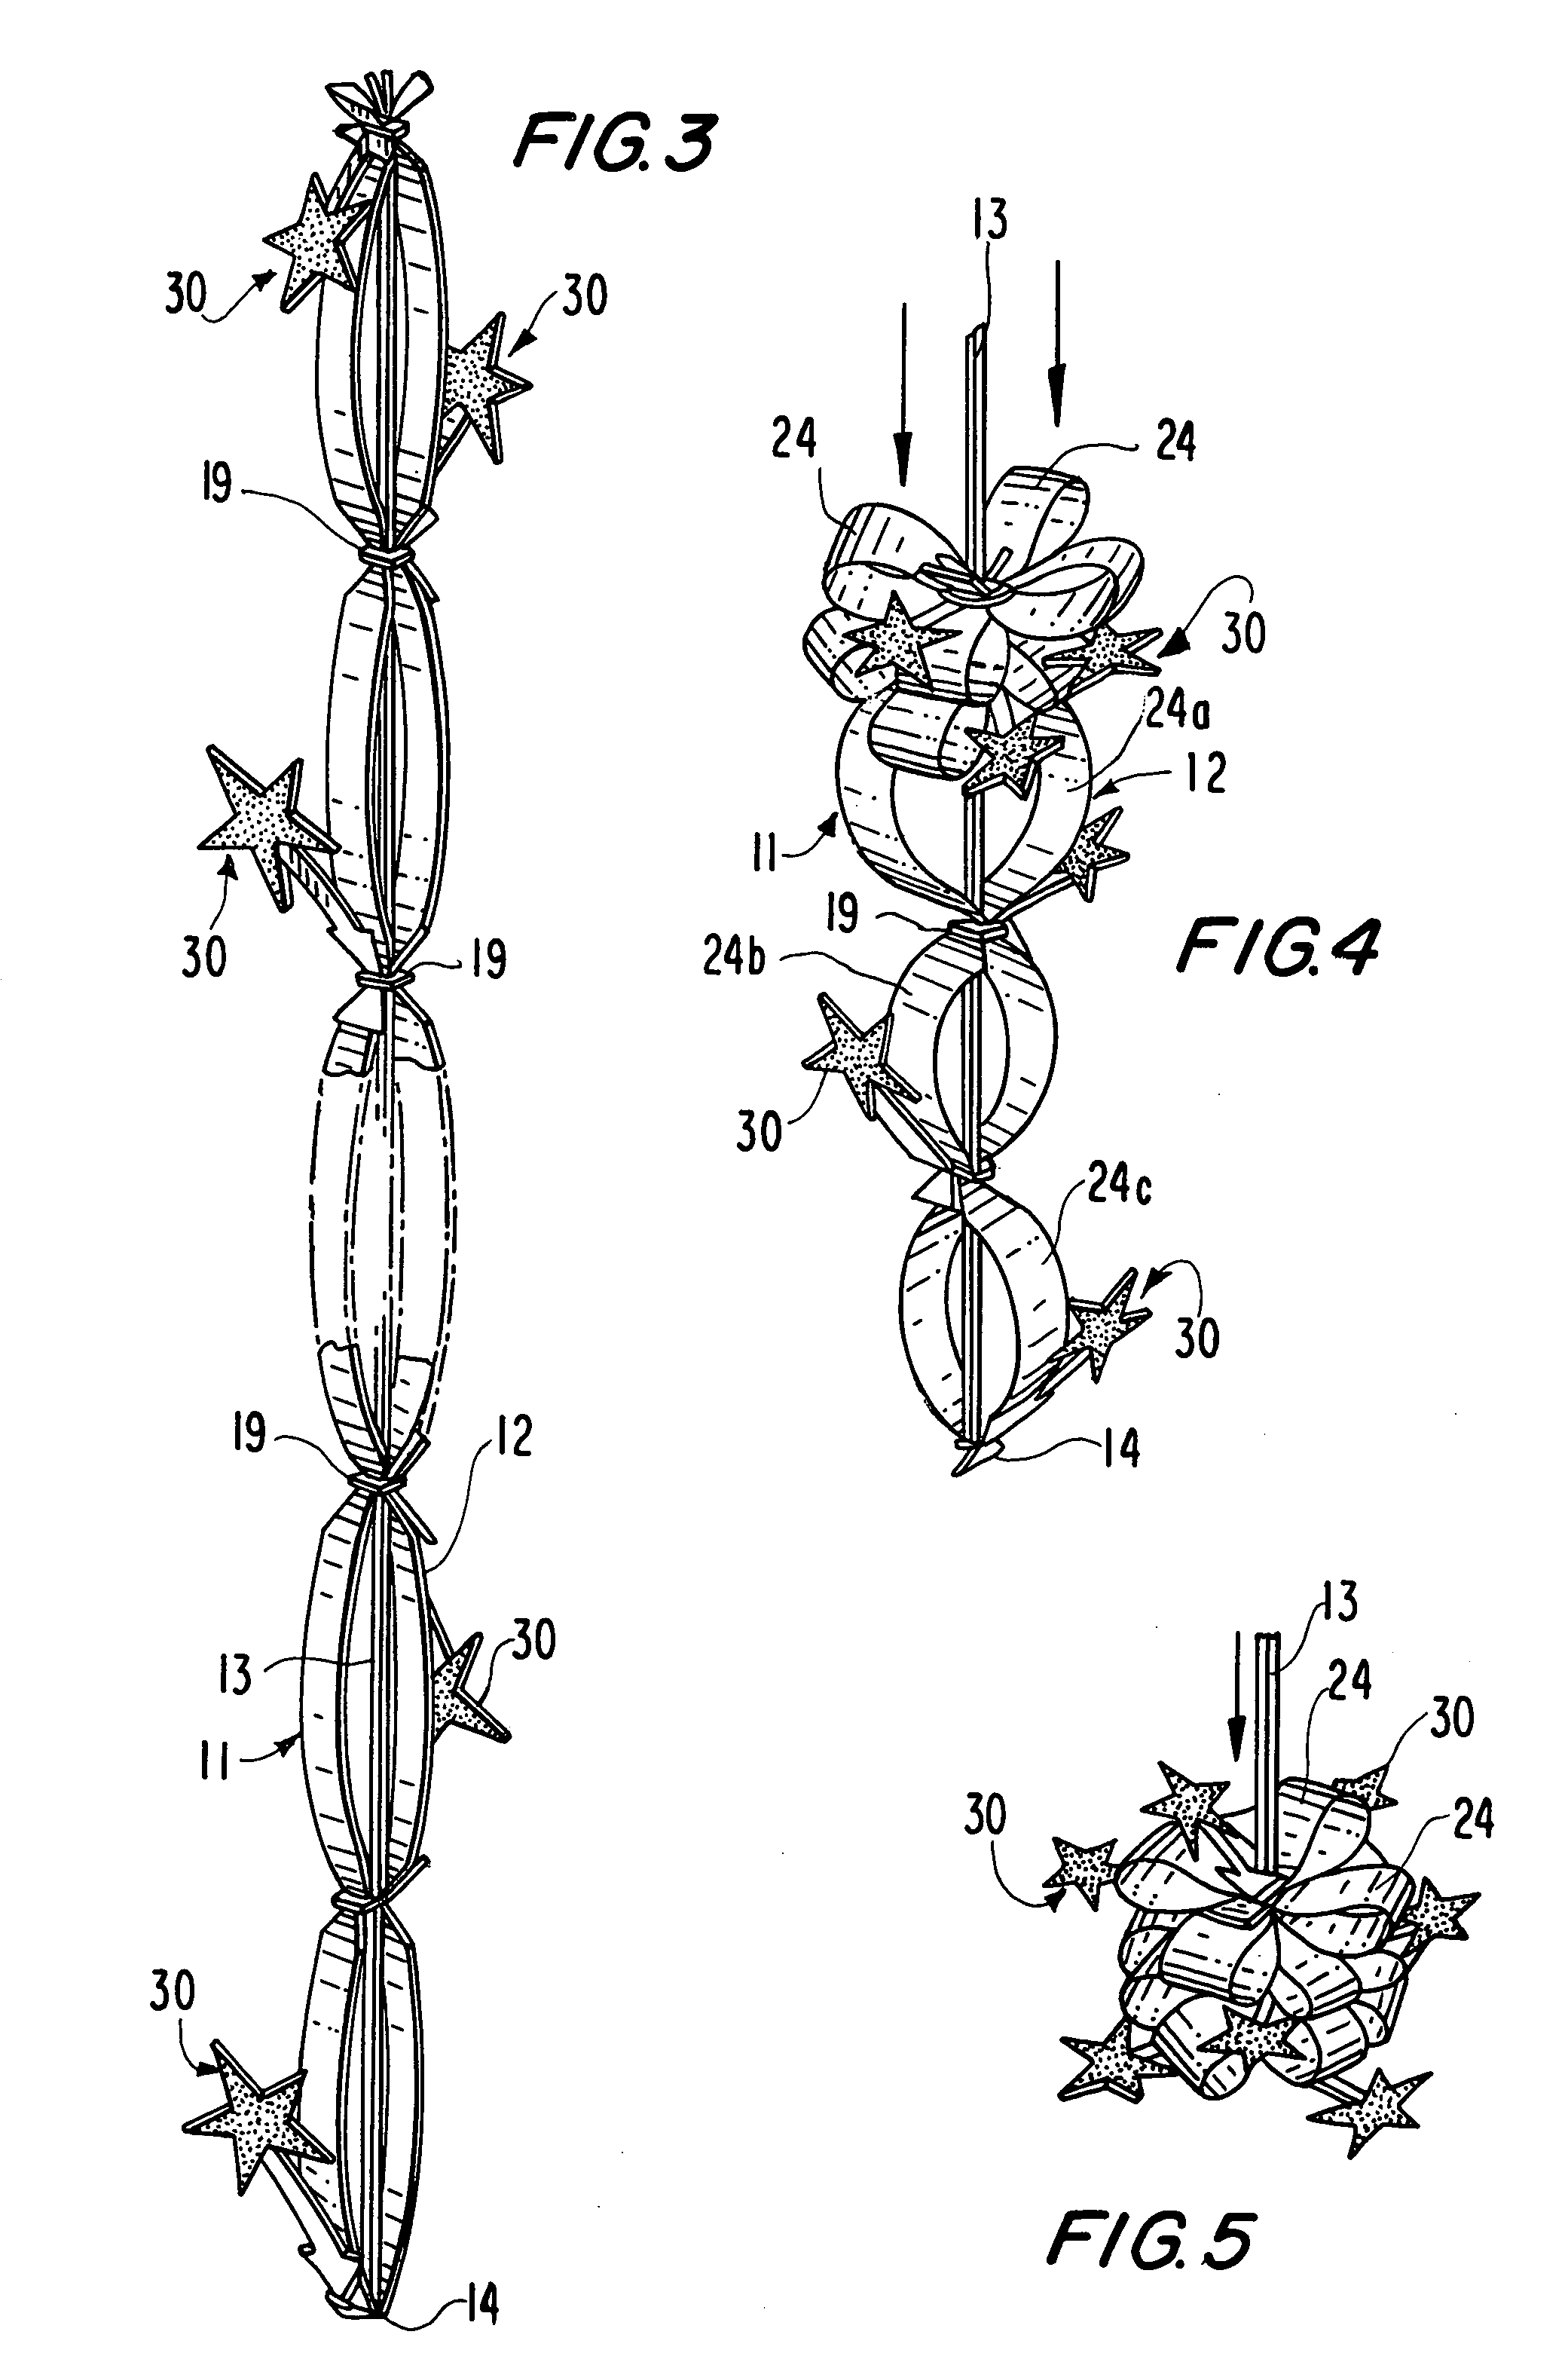 Ribbon assembly for forming a decorative bow